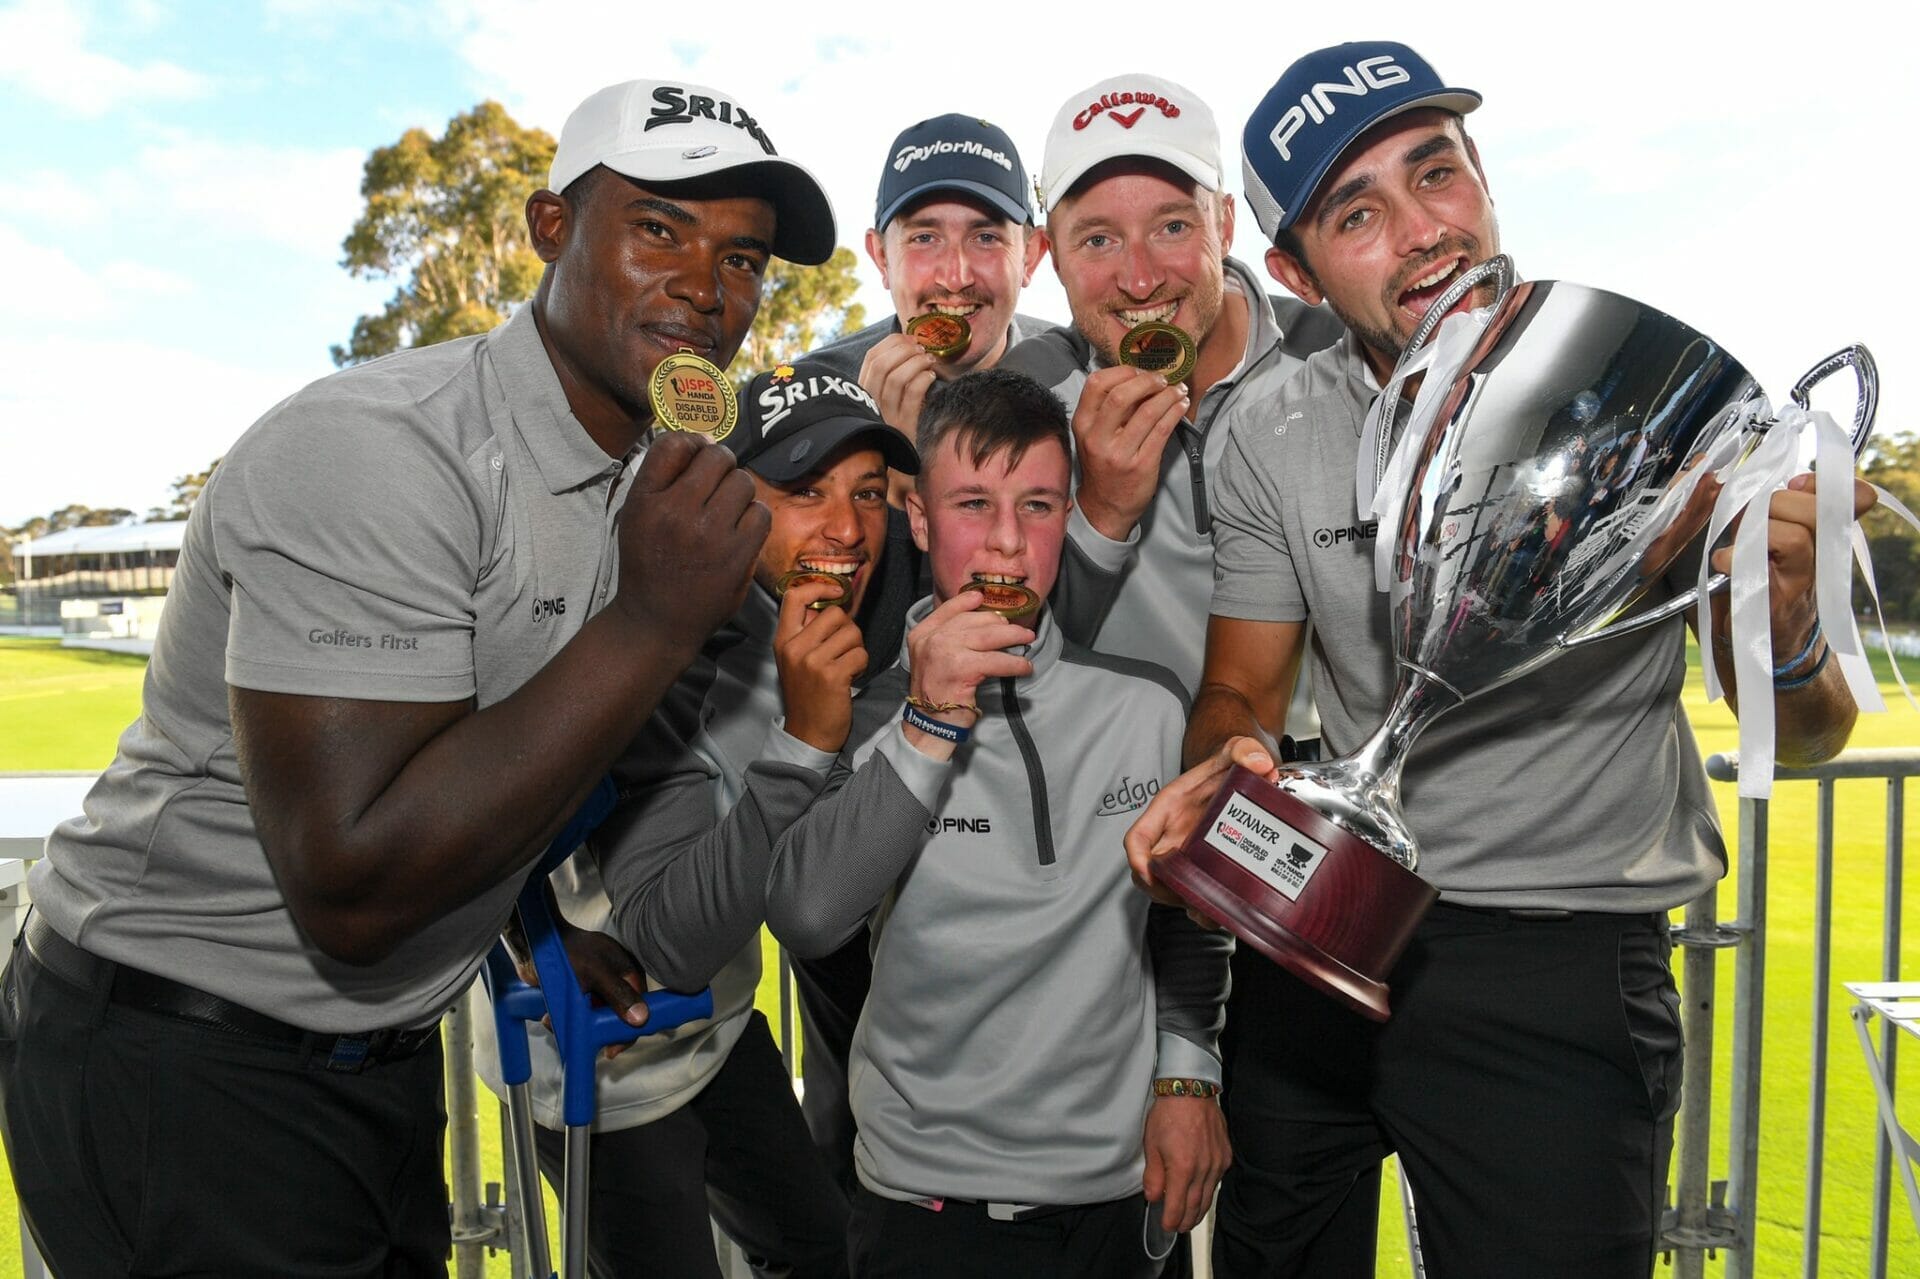 Lawlor leaves Australia a star after Disabled Golf Cup win